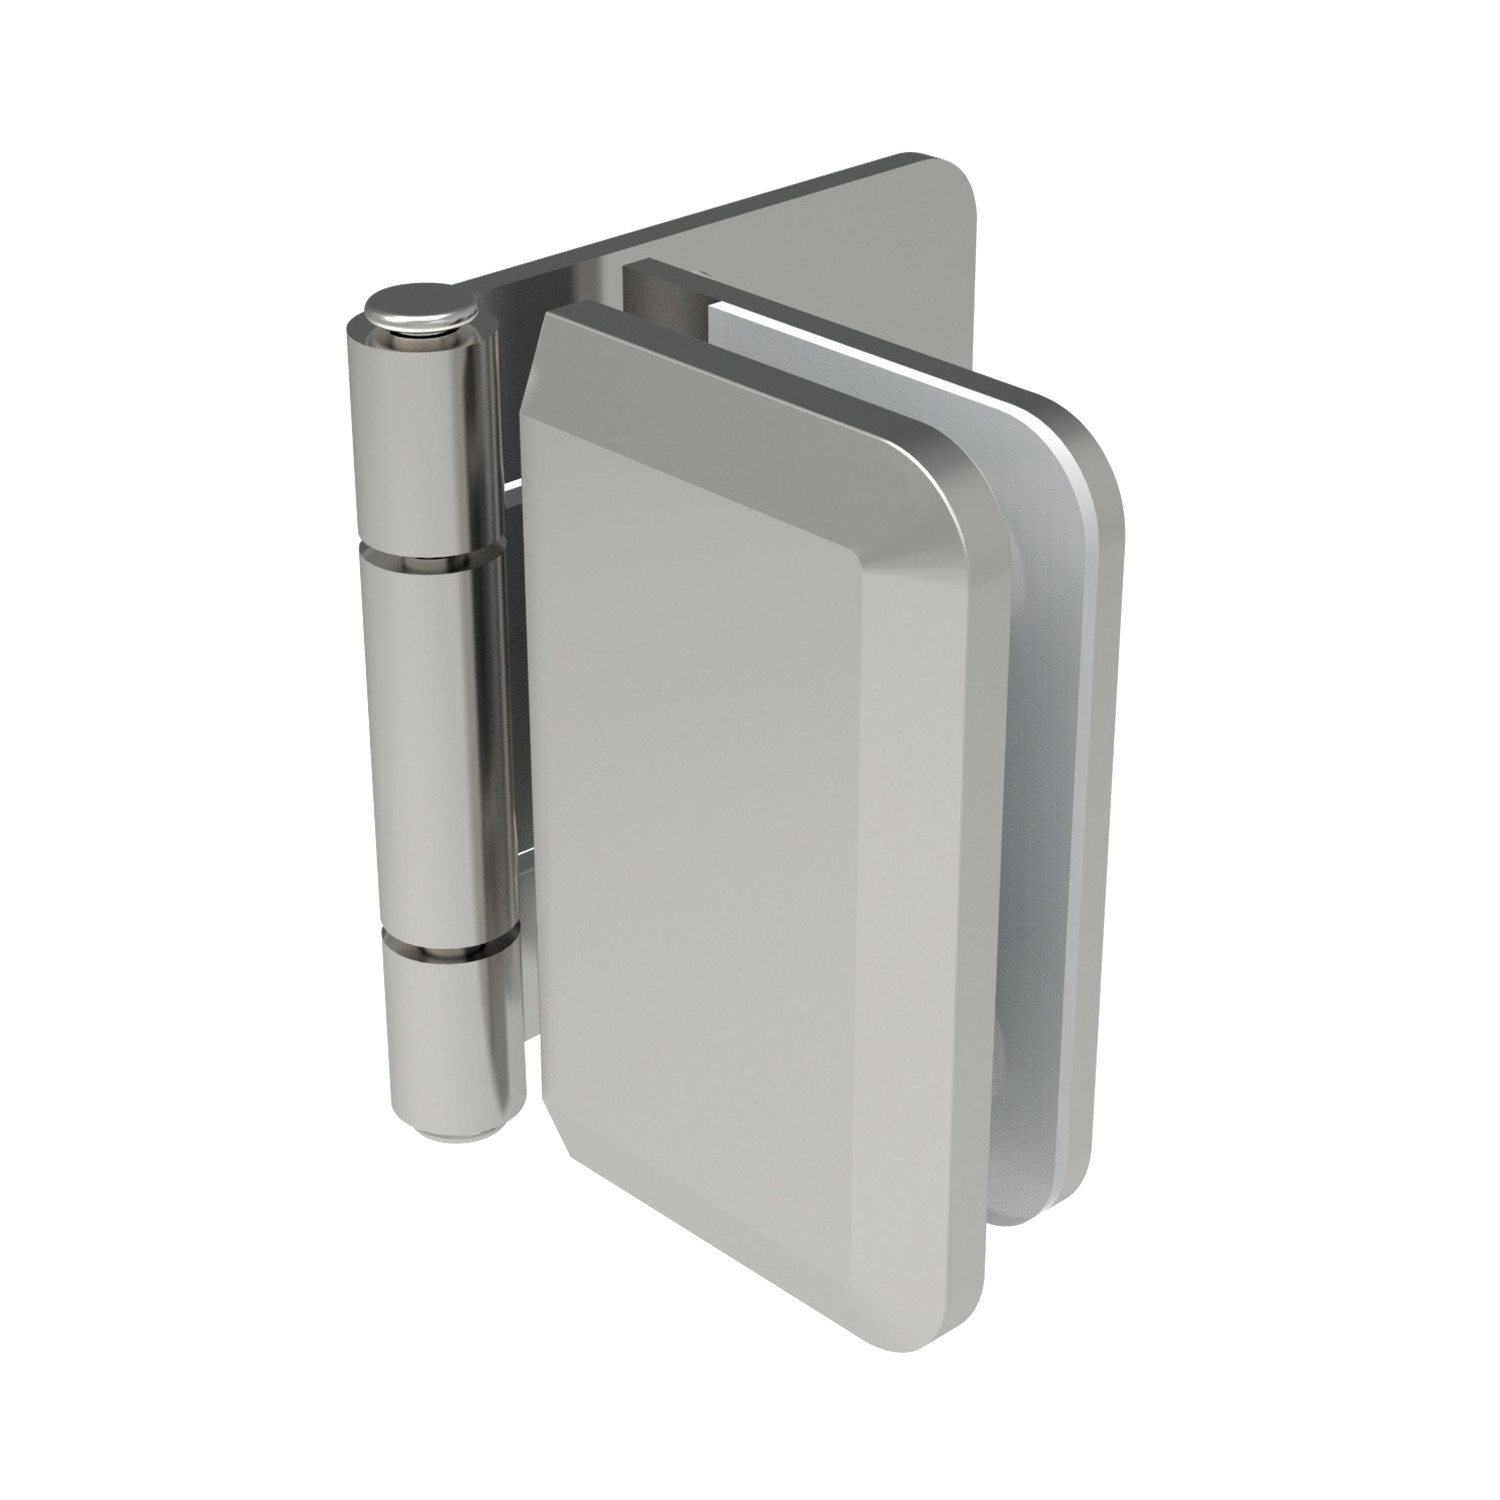 T2300.AC0010 Glass Door Hinge - Inset Type Stainless steel - Glass thickness 5 to 8mm. Load capacity 2 hinges 12kg